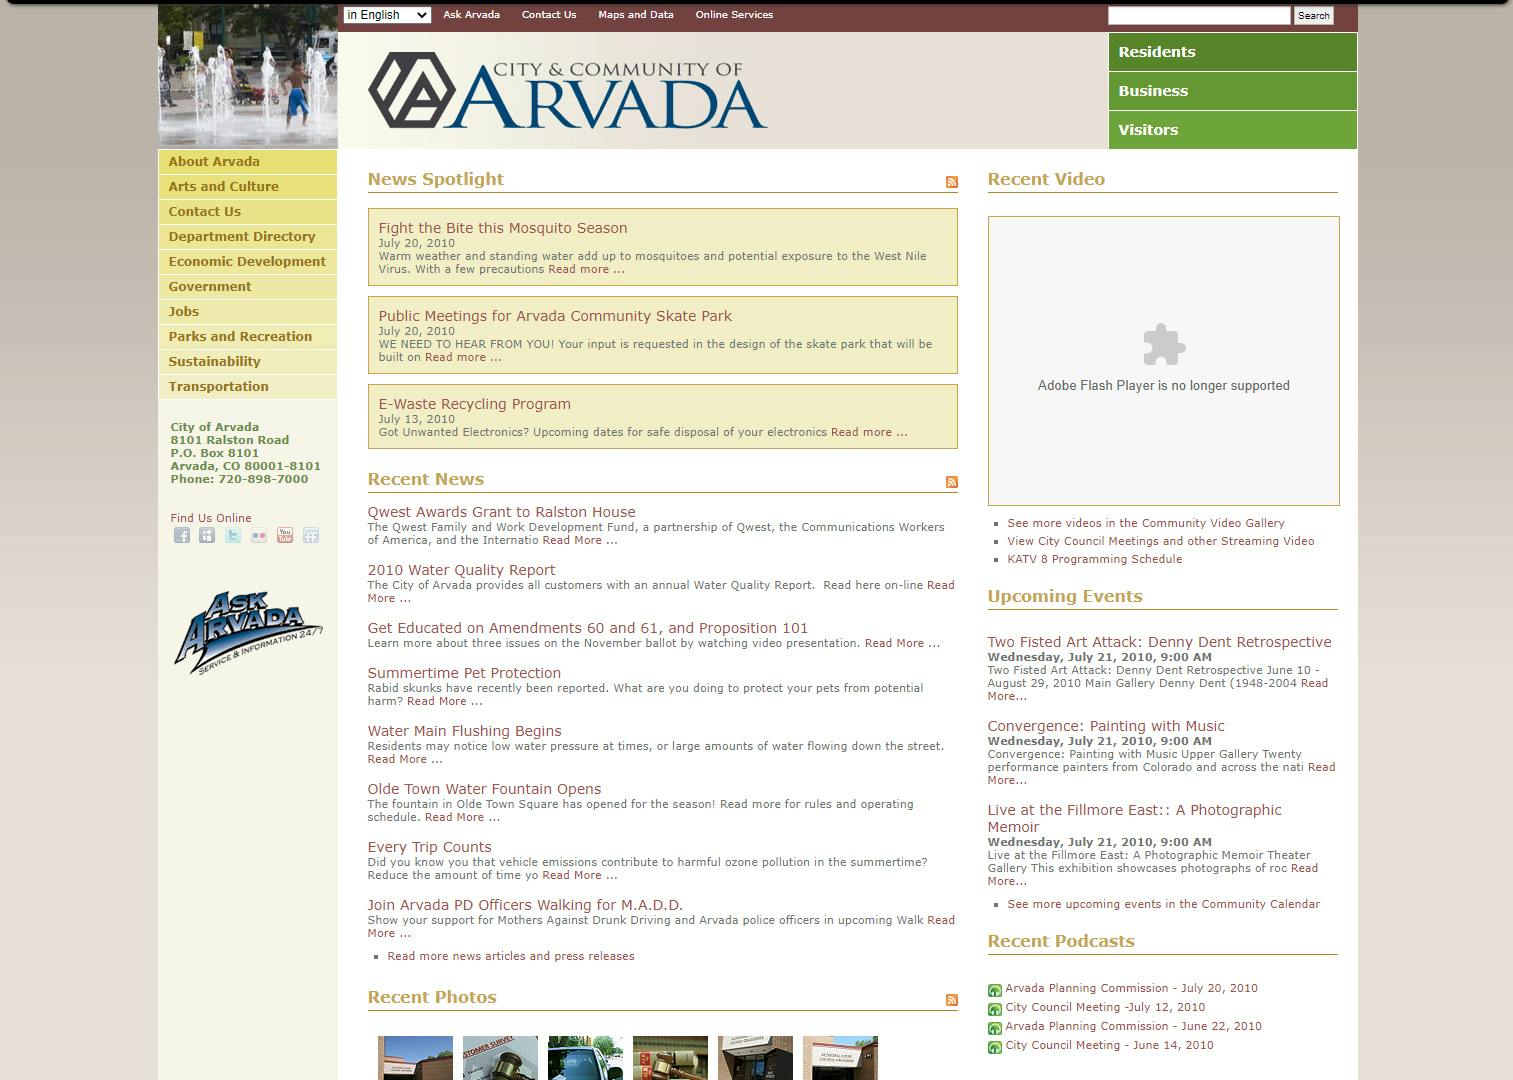 Arvada.org in 2010